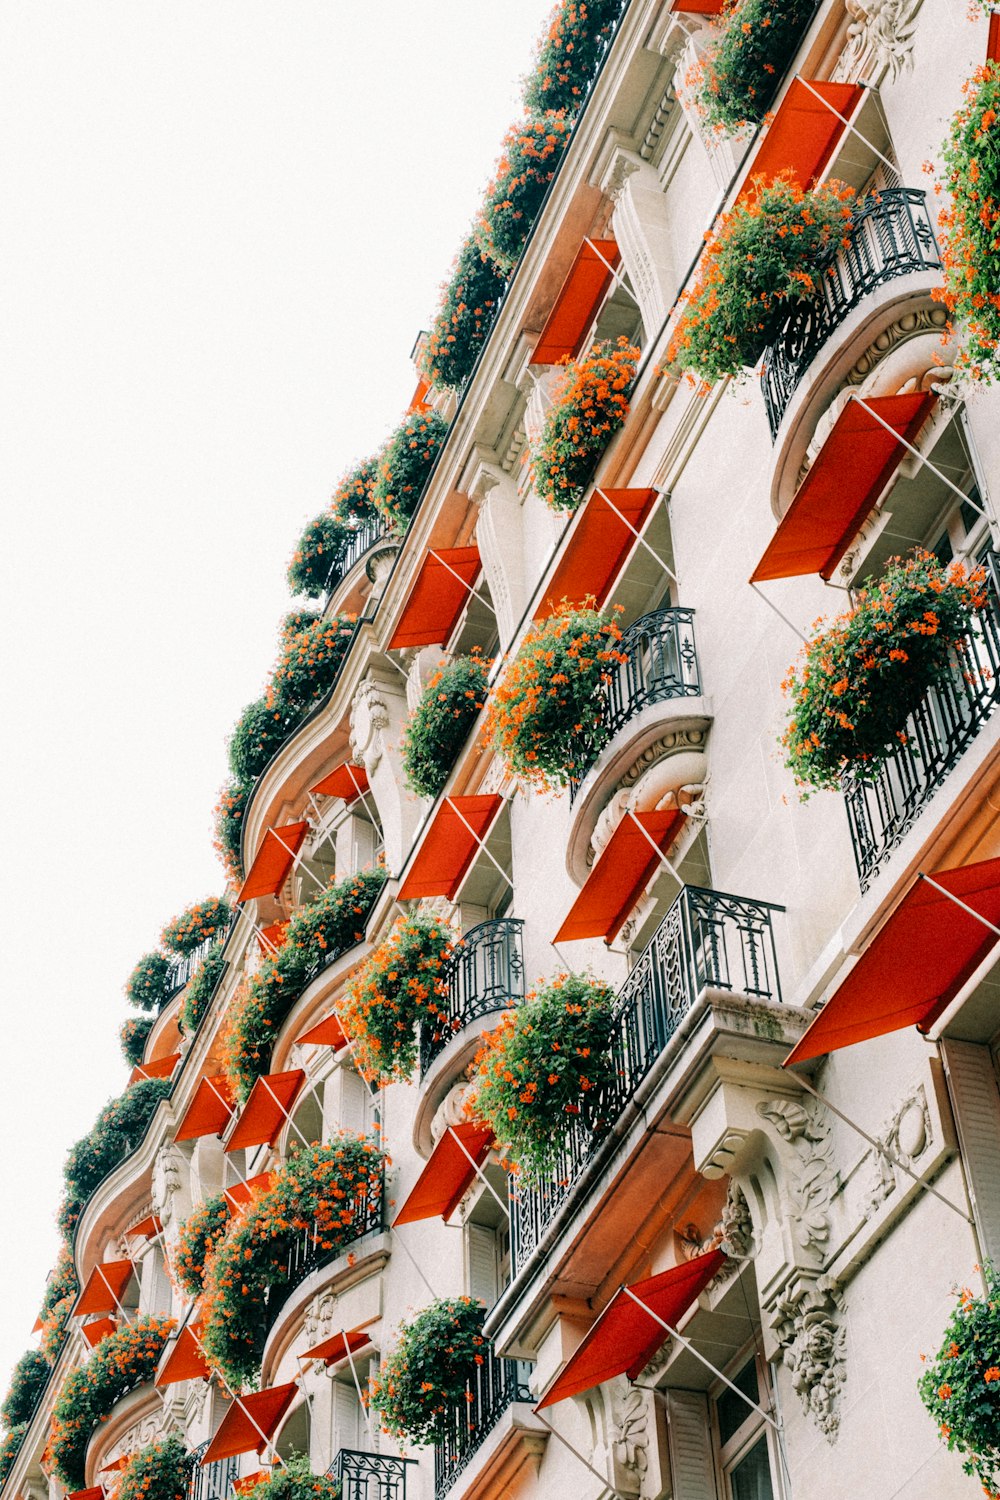 a tall building with lots of windows and flowers on the balconies